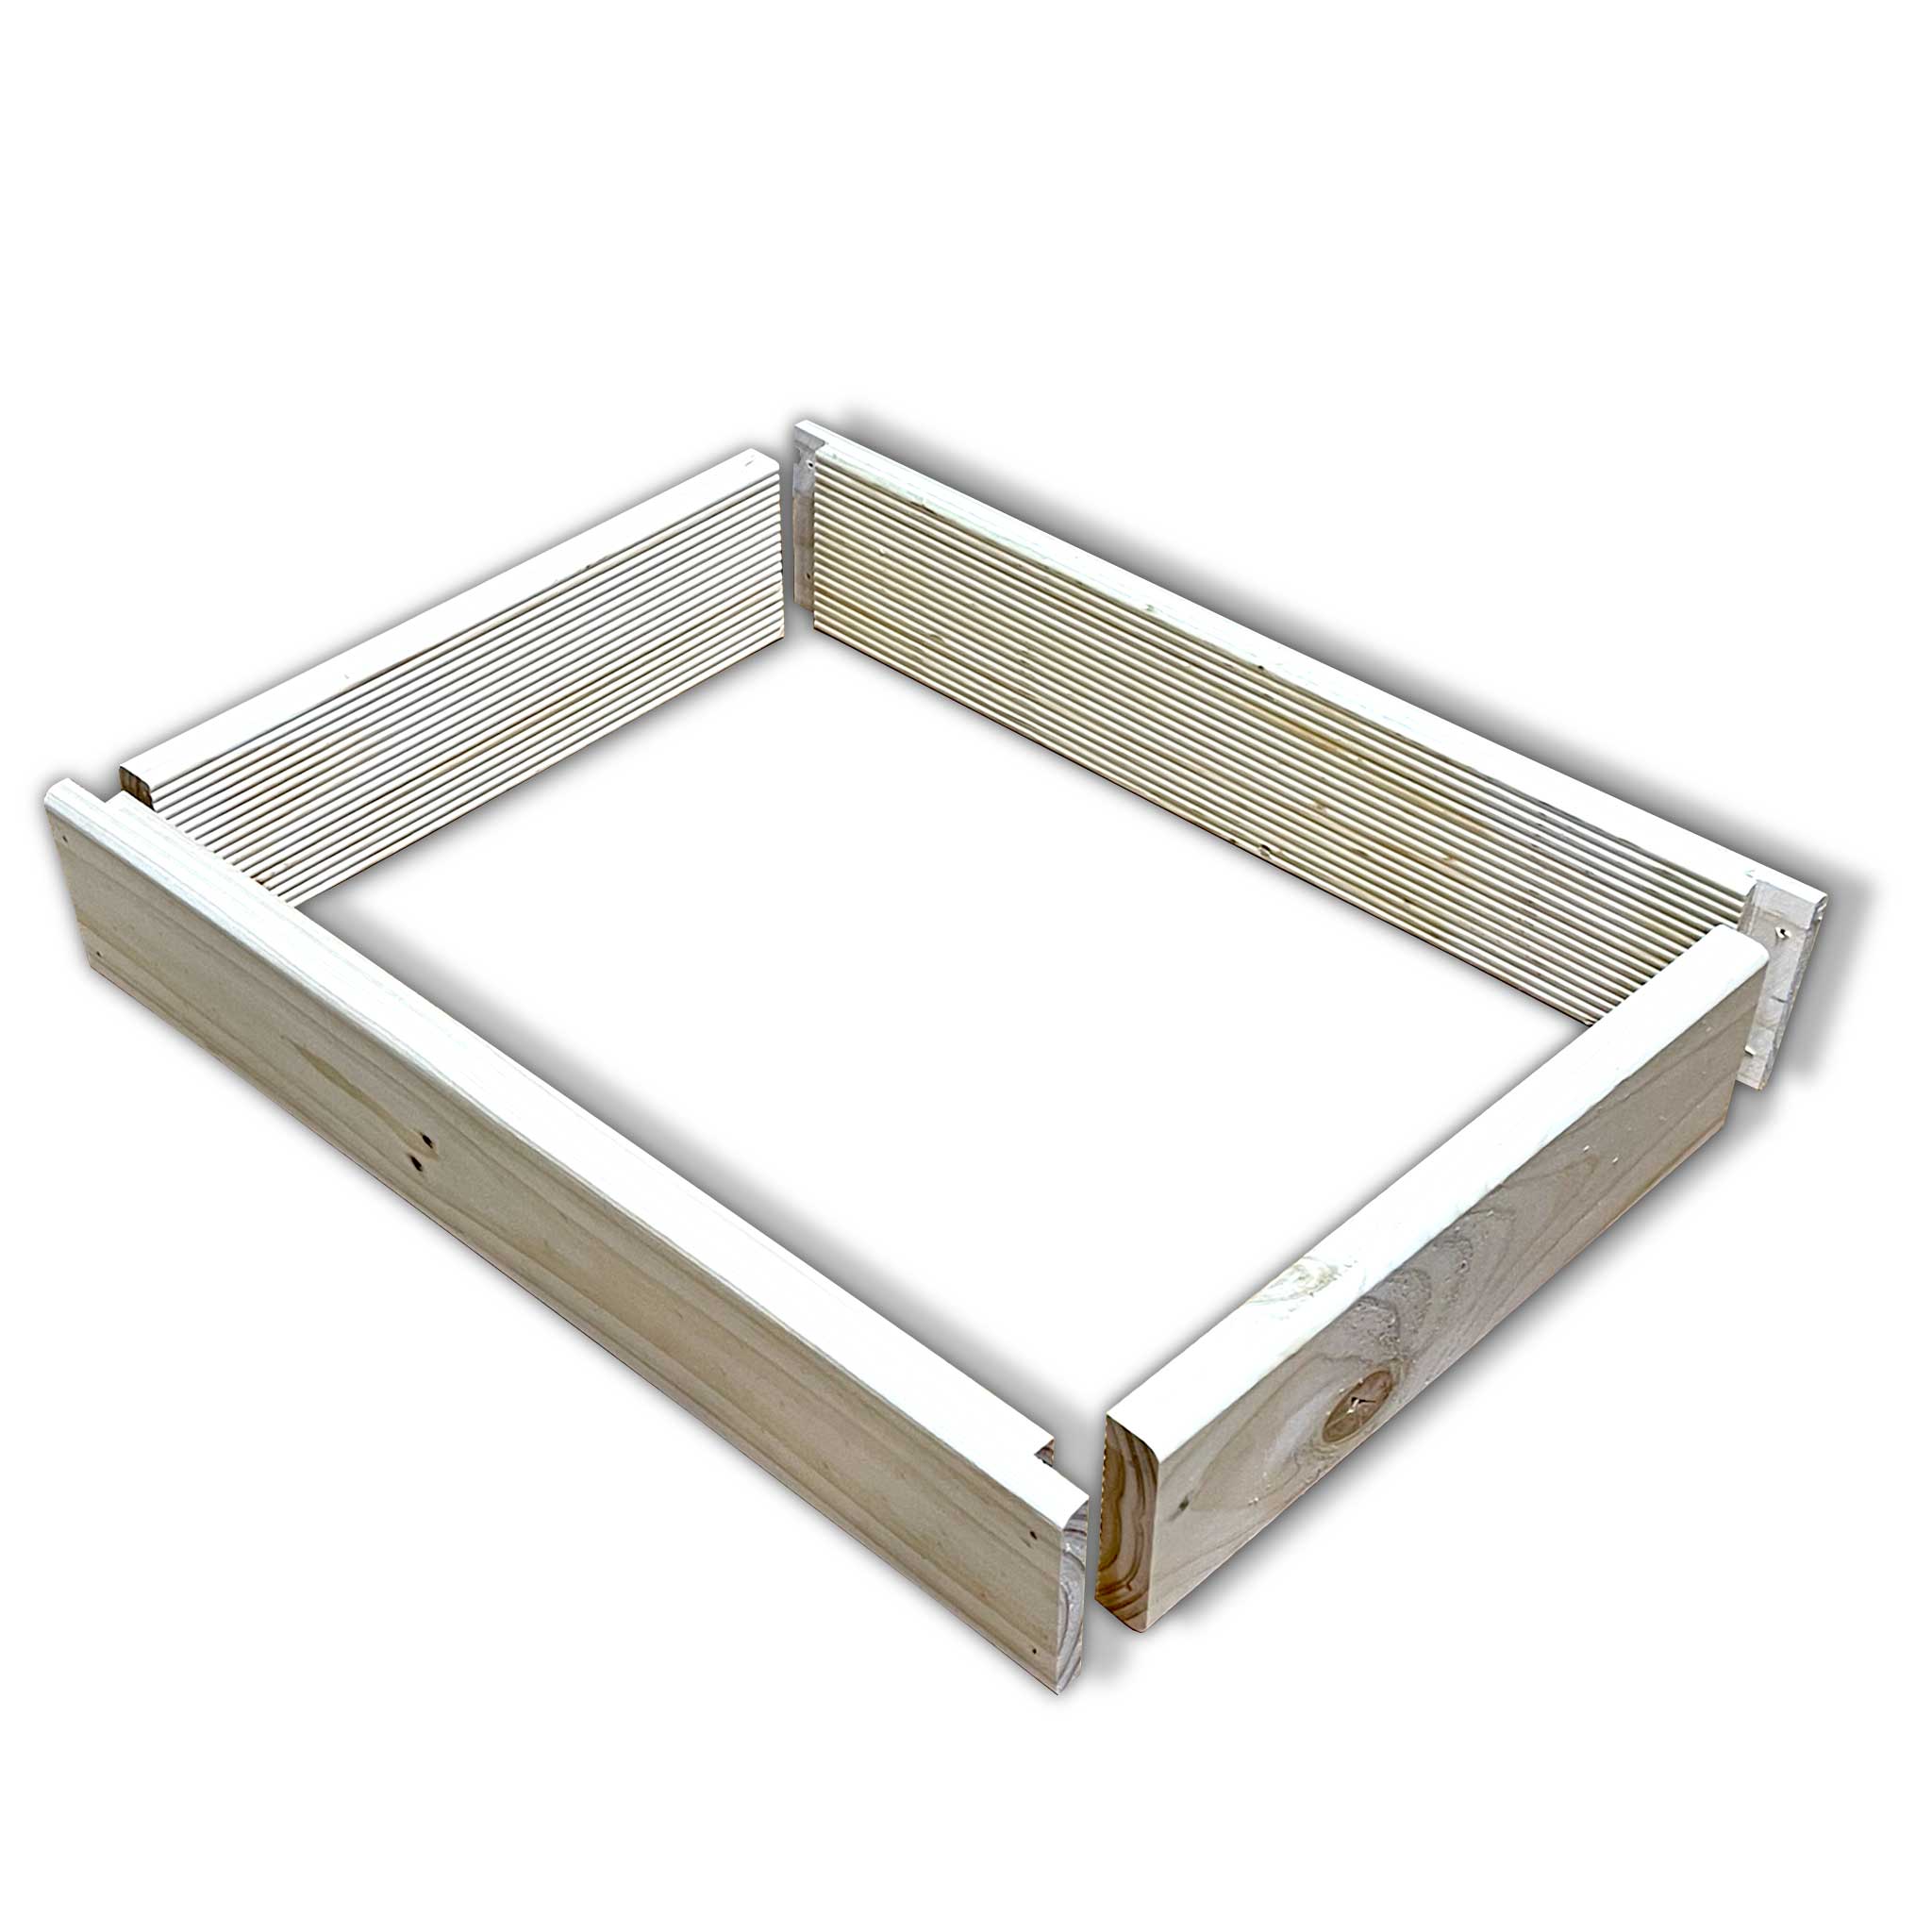 Rim Box Frame Housing for Ceracell and Other Beekeeping 10 Frame Top Feeders - Bee Feeders collection by Buzzbee Beekeeping Supplies